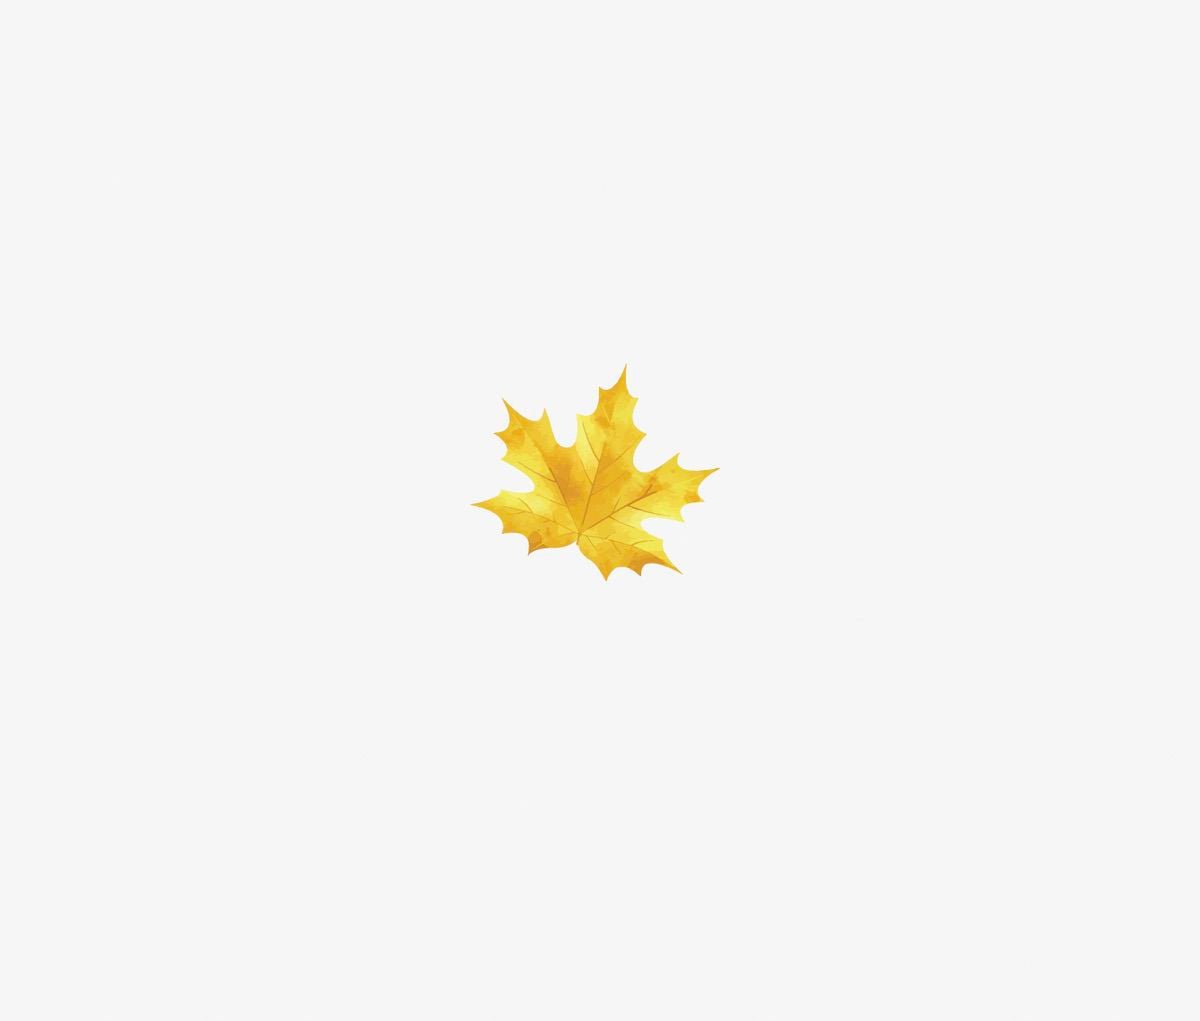 A single yellow maple leaf, symbolizing Cover-Alls Thanksgiving Cornucopia Decals, centered on a plain white background.